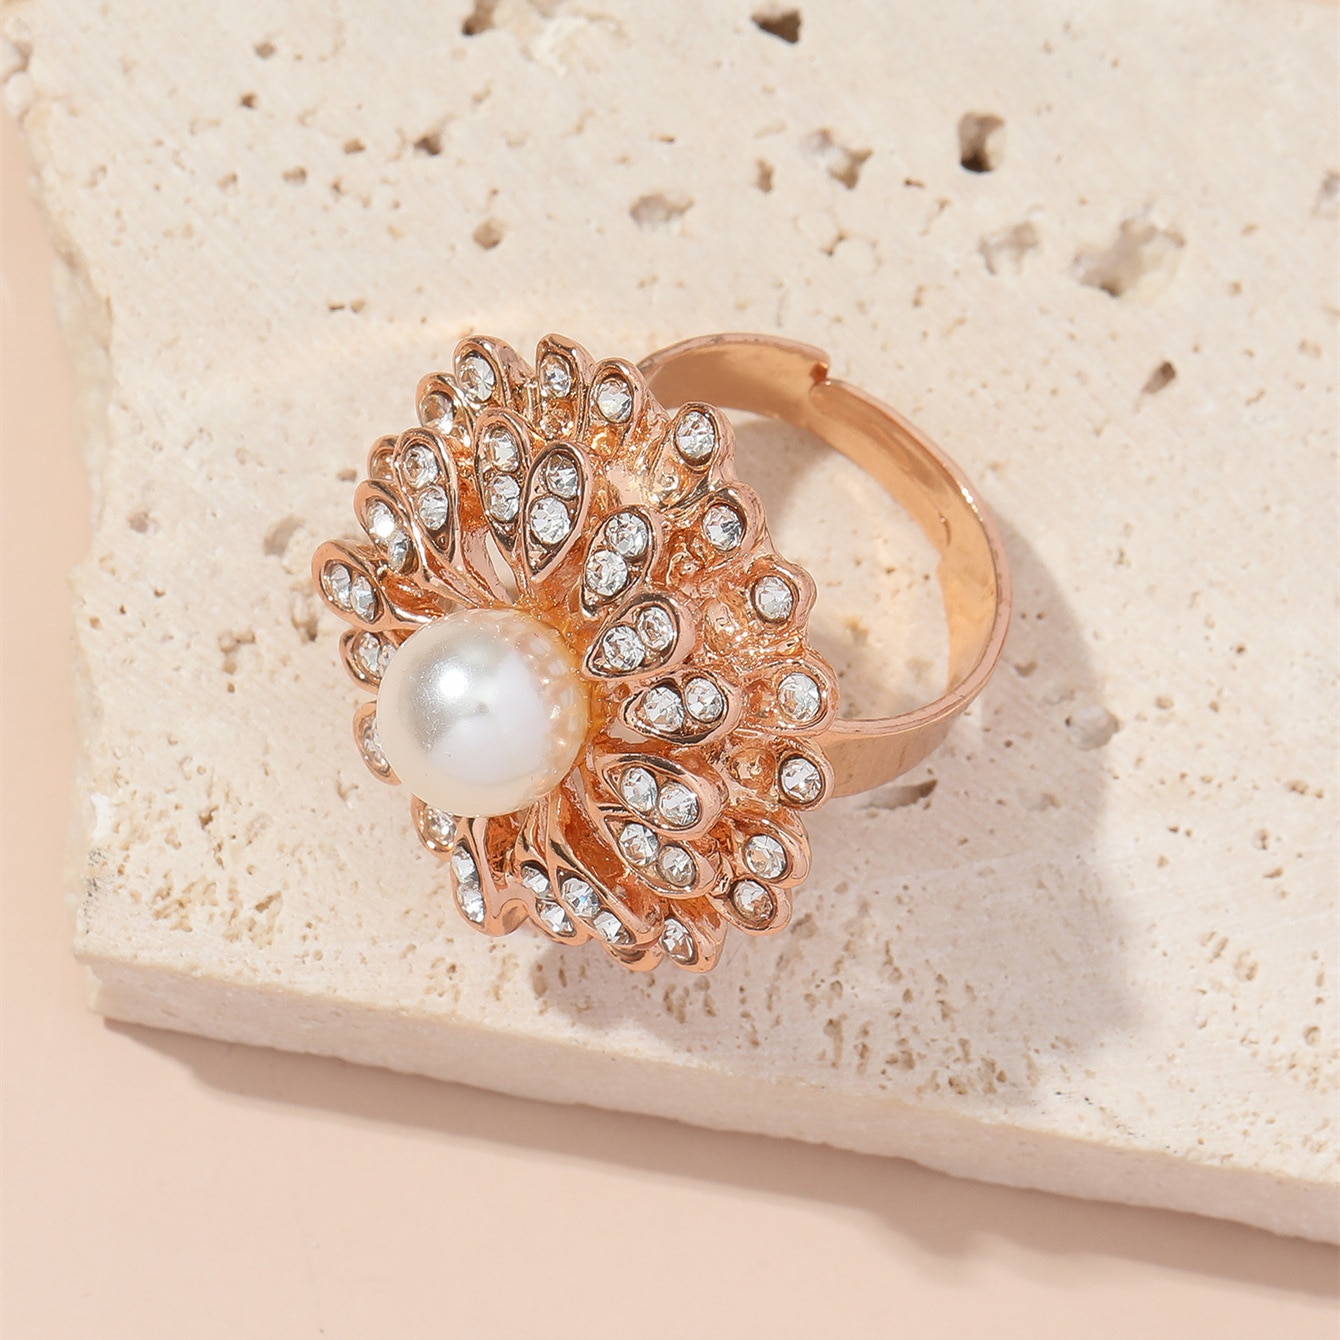 New-Retro-Small-Flower-CZ-Rings-Indian-Jewelry-Retro-Cute-Pearl-Finger-Ring-Banquet-Jewelry-Female-G-1005004336840341-3